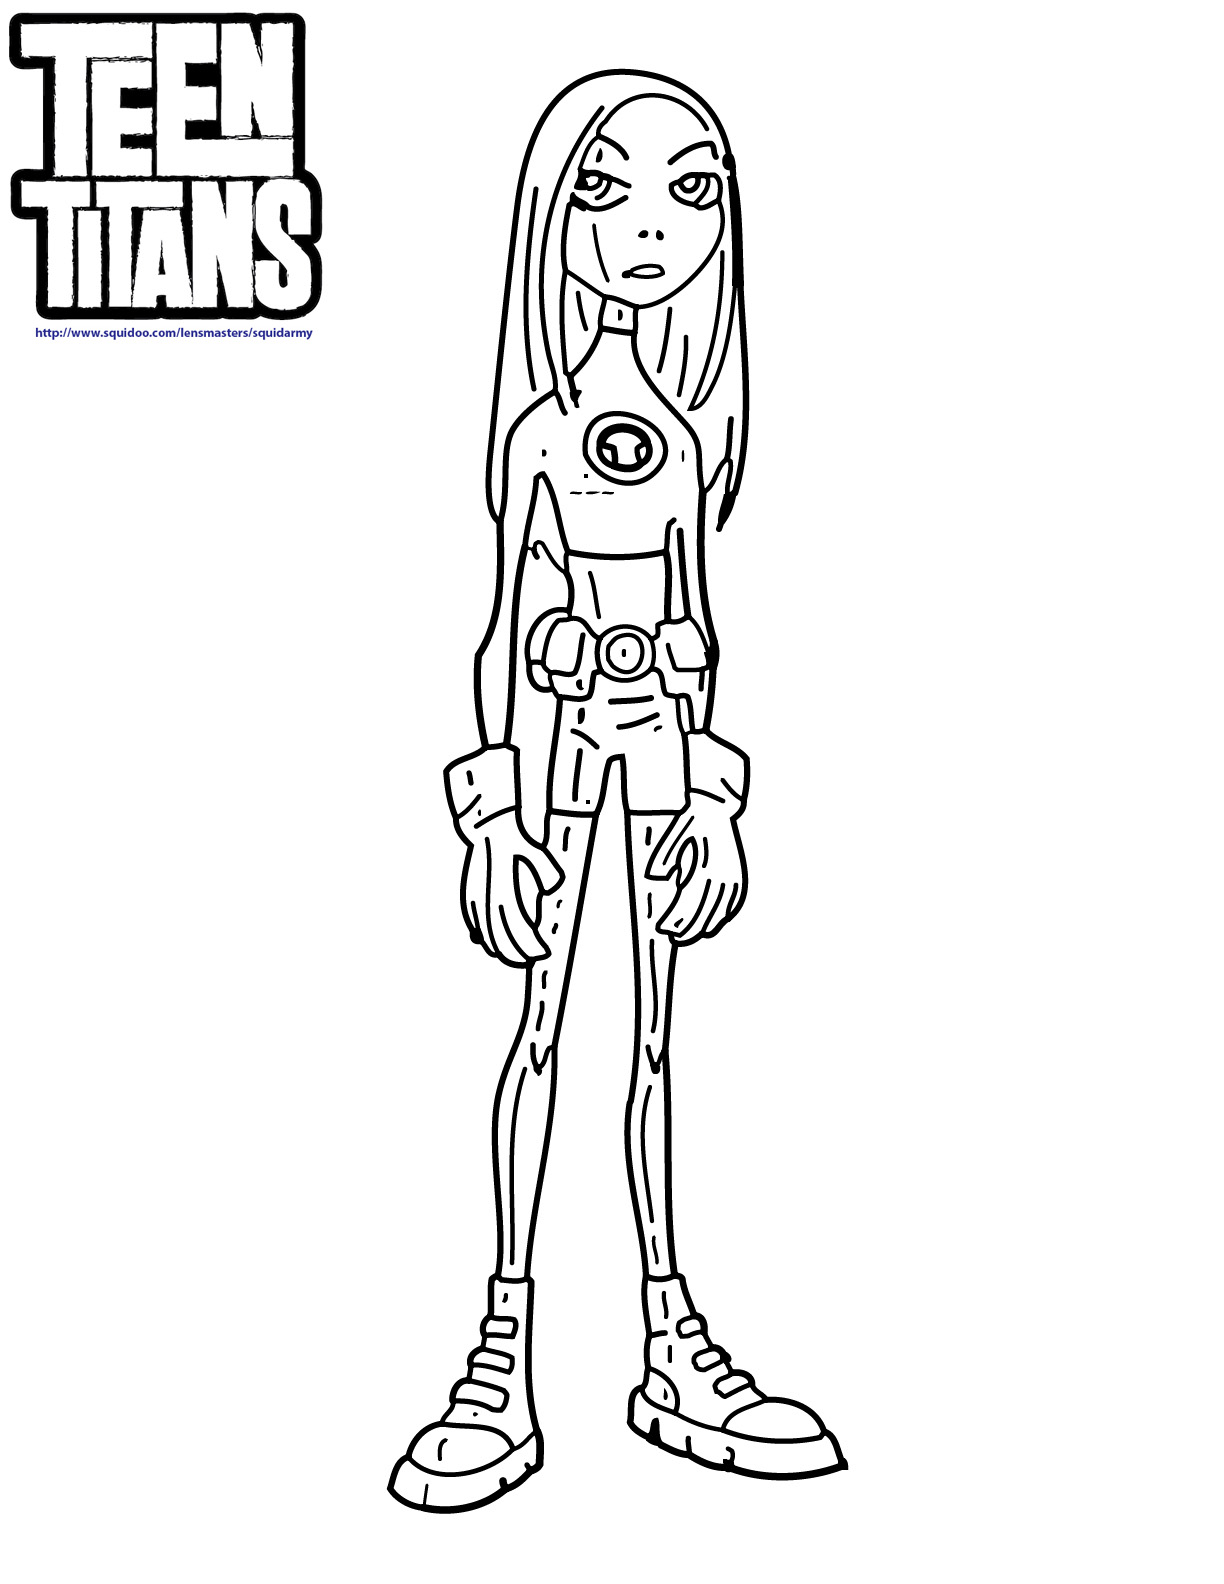 teen titans coloring pages teen titans coloring pages best coloring pages for kids teen titans coloring pages 